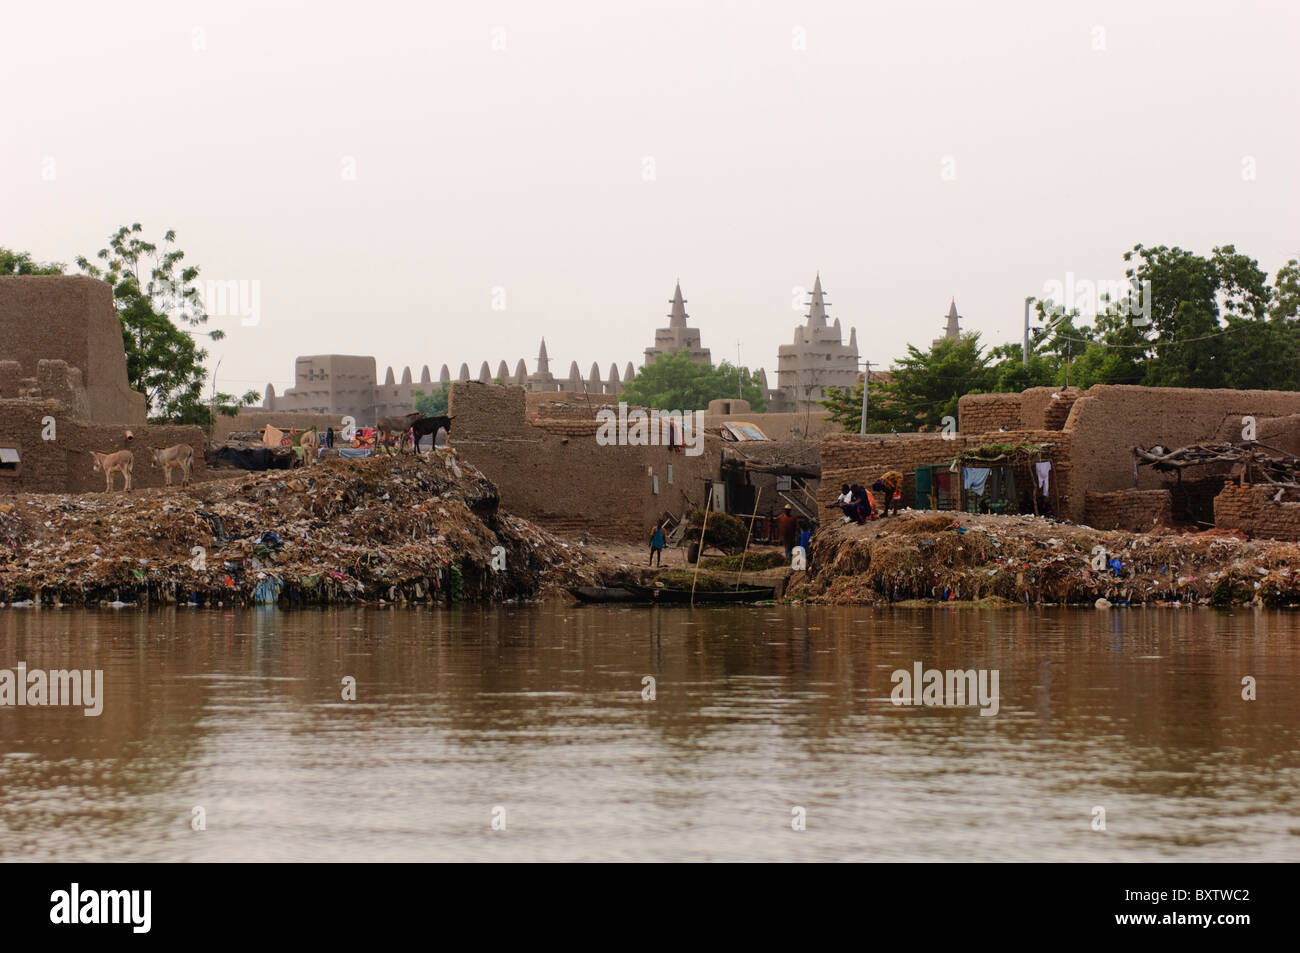 Mounds of household refuse on the banks of the Bani river in Djenné. The Great Mosque on the background. Djenné, Mali. Stock Photo